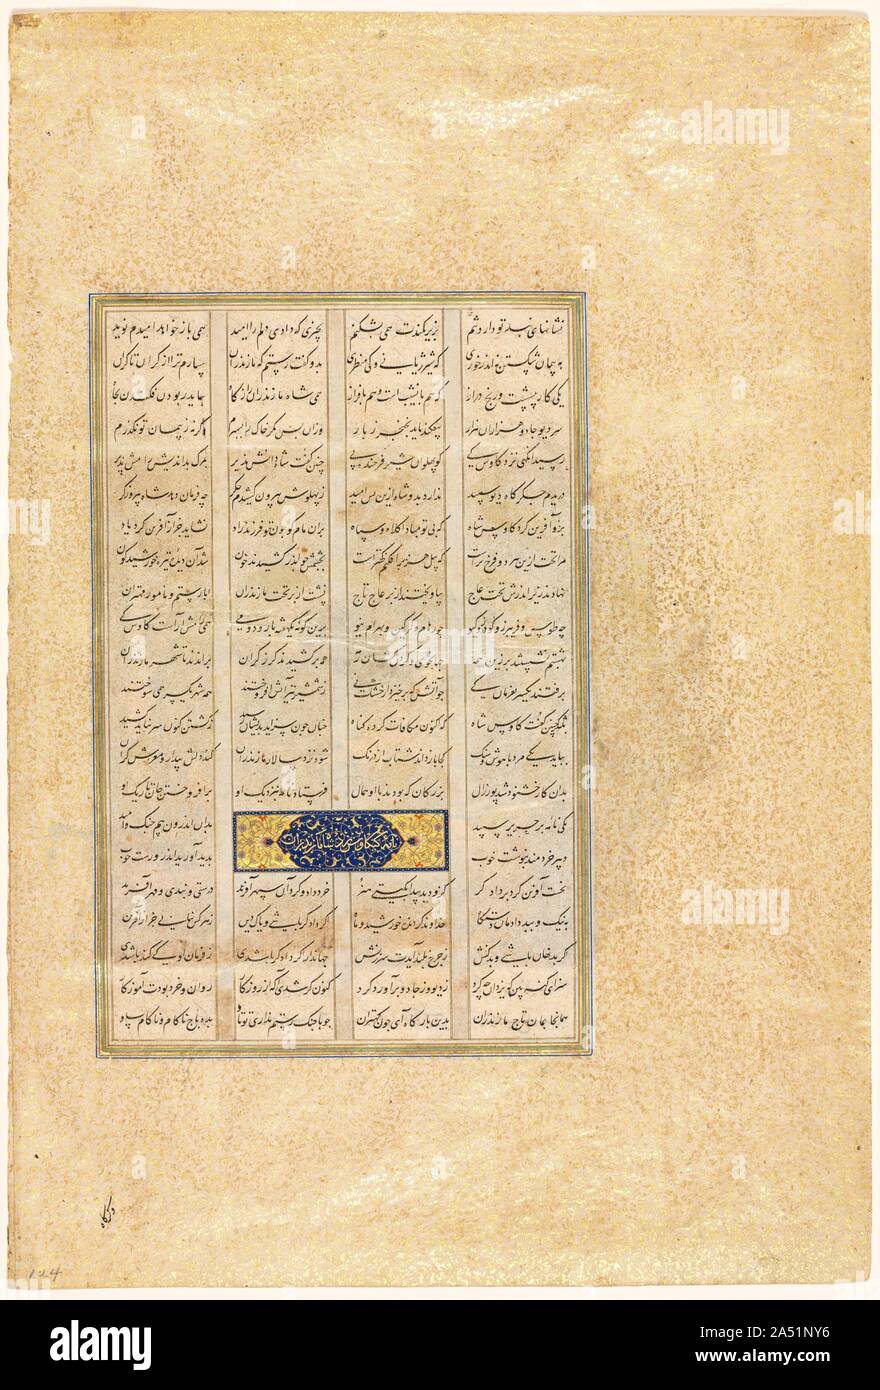 Page from a Shah-nama (Book of Kings) of Firdausi (Persian, about 934-1020), 1520-40. Begun at the end of the reign of Shah Ismail (reigned 1501-24), first king of the Safavid dynasty of Iran, this copy of the Shah-nama (Book of Kings) was completed during the reign of his son Shah Tahmasp. Unparalleled in scope and refinement, the book included 259 paintings by master artists in the royal workshop. Two calligraphers copied the text in an elegant, flowing nasta&#x2018;liq script. In 1568, Shah Tahmasp gave this book as a gift to the Ottoman sultan Selim II of Turkey. Stock Photo